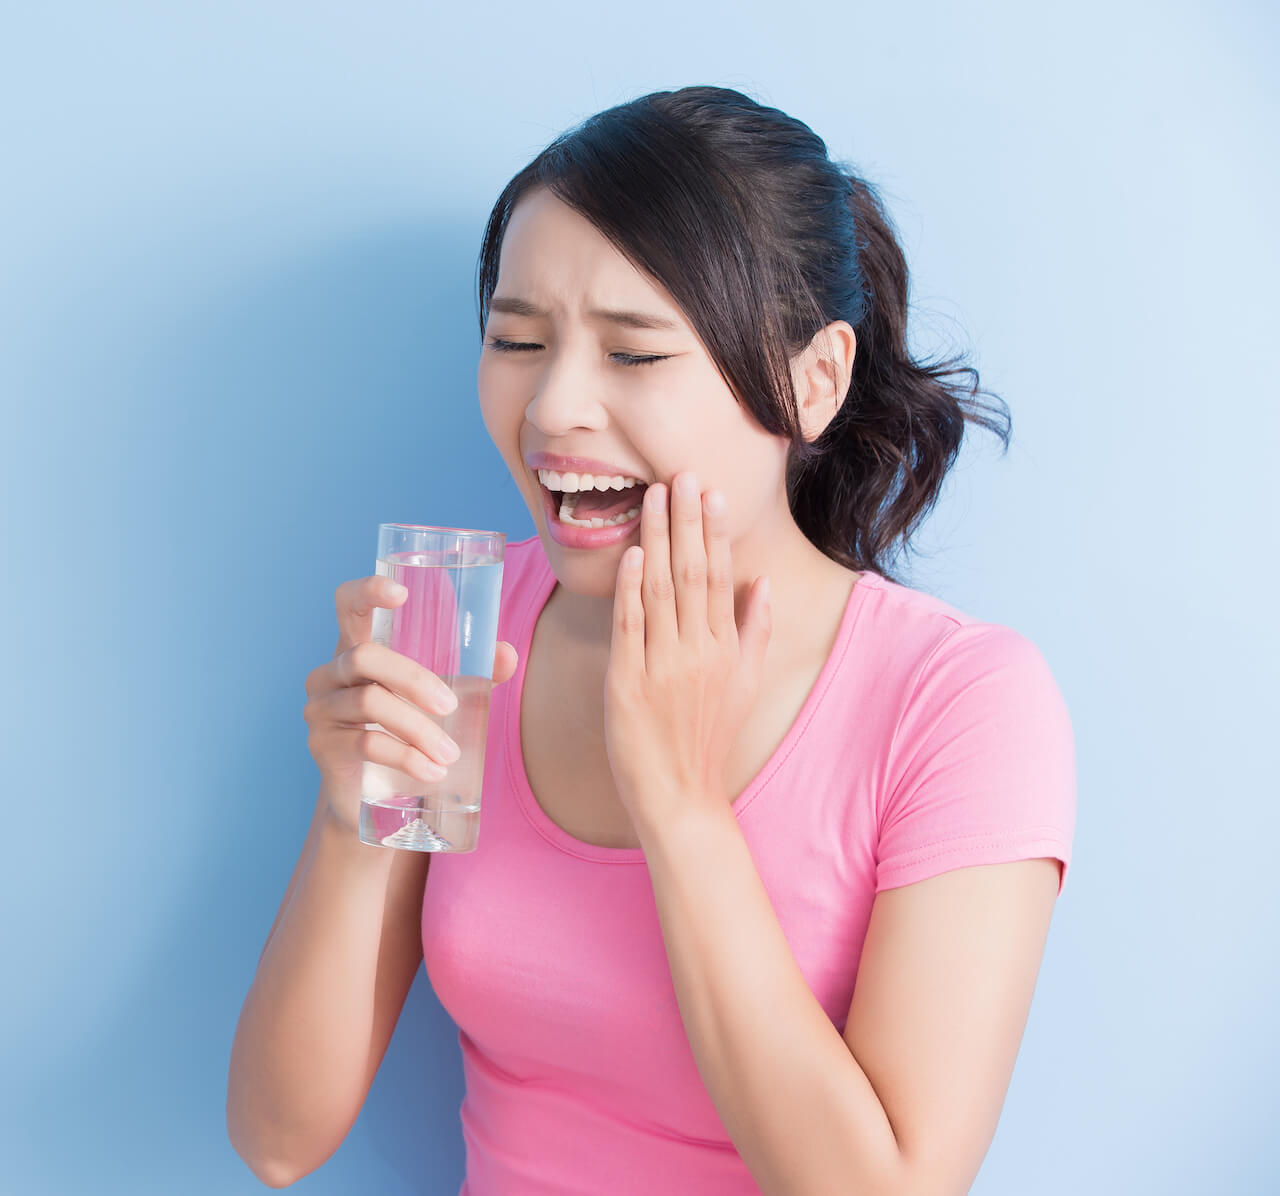 Woman with sensitive teeth when drinking cold water.